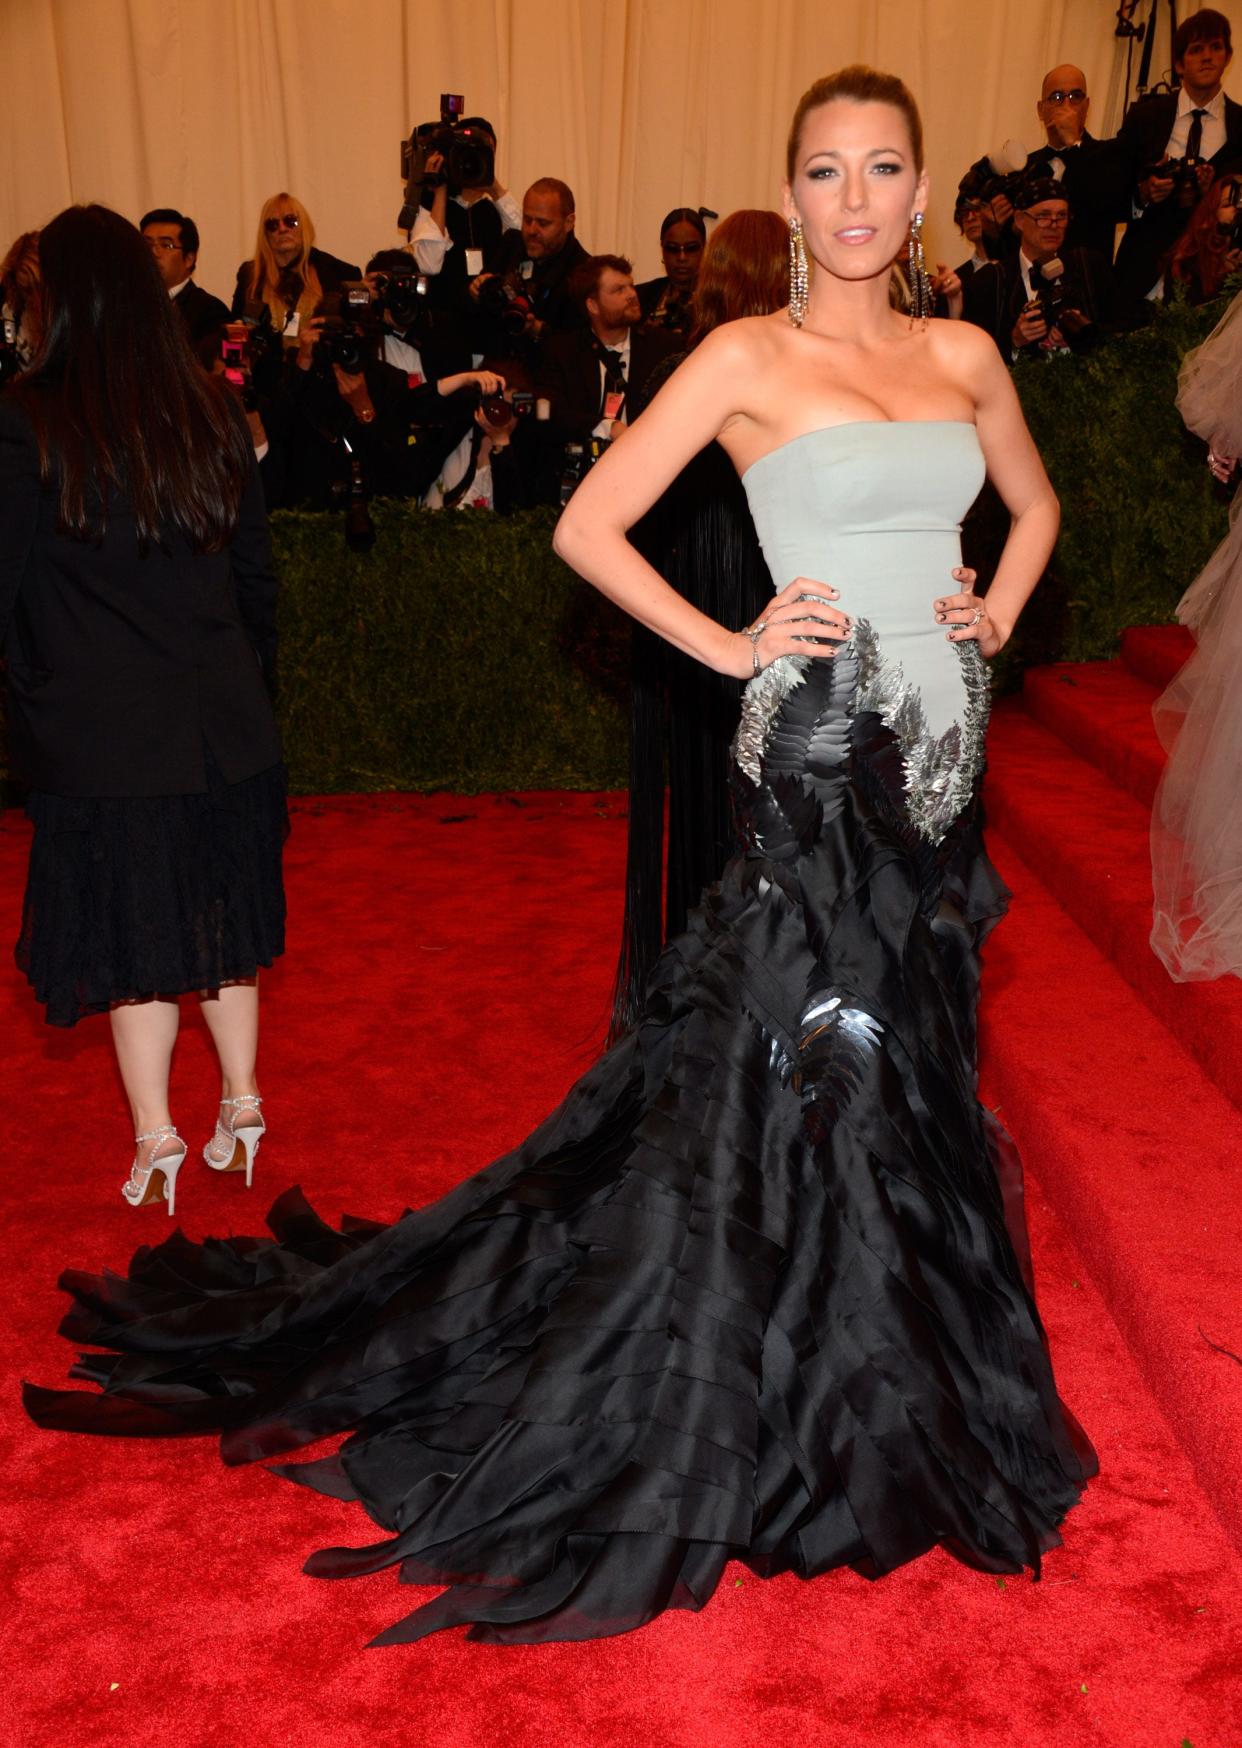 Blake Lively at the 2013 Met Gala in a gown with a gray top and black bottom.